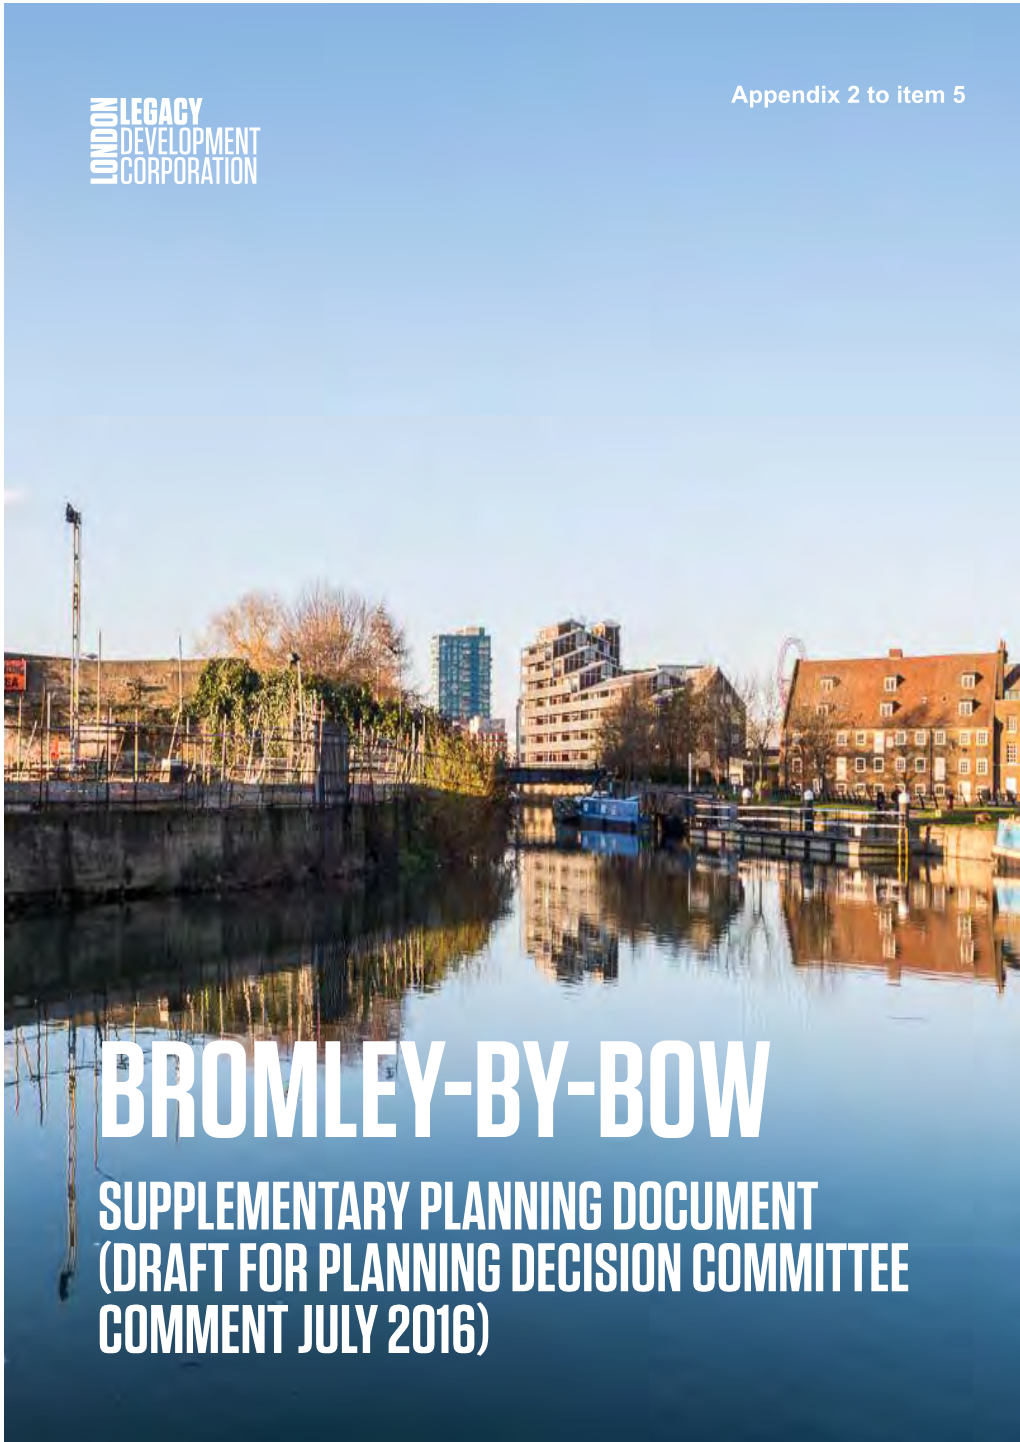 Bromley-By-Bow Supplementary Planning Document (Draft for Planning Decision Committee Comment July 2016)